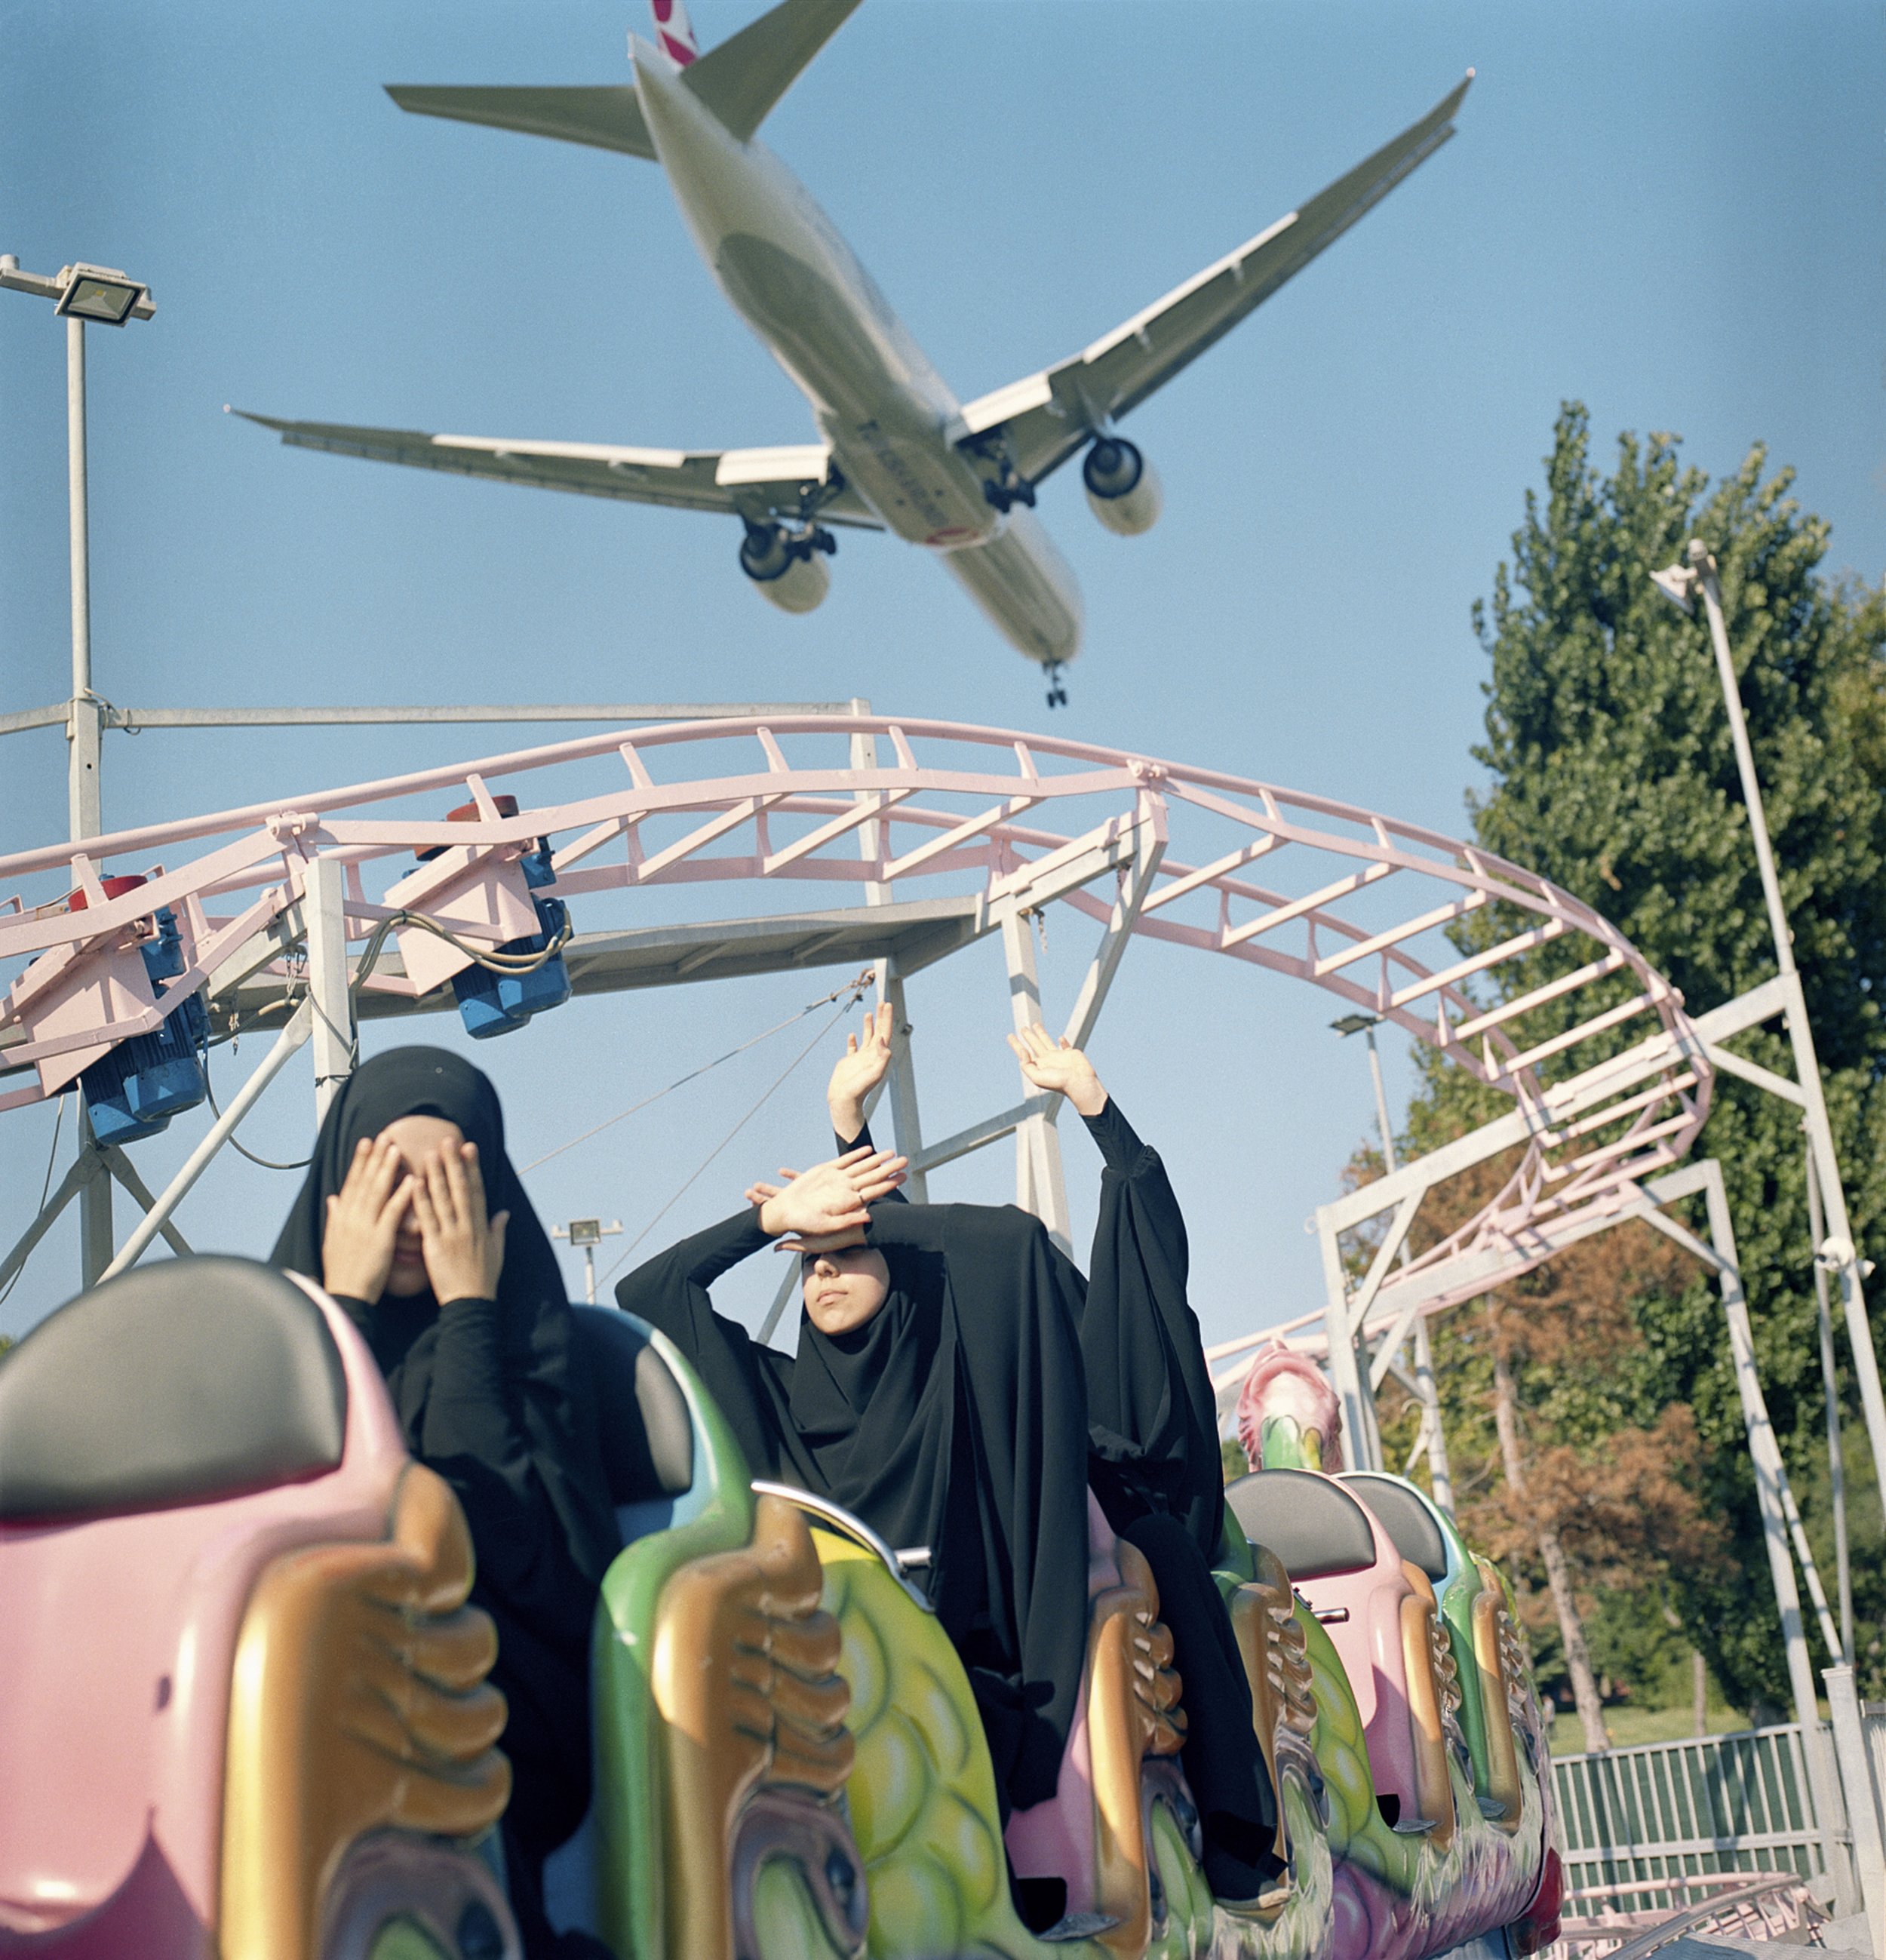 A plane flies low over students riding a train at a funfair over the weekend. Istanbul, Turkey, 29 August 2018 © Sabiha Çimen/Magnum Photos